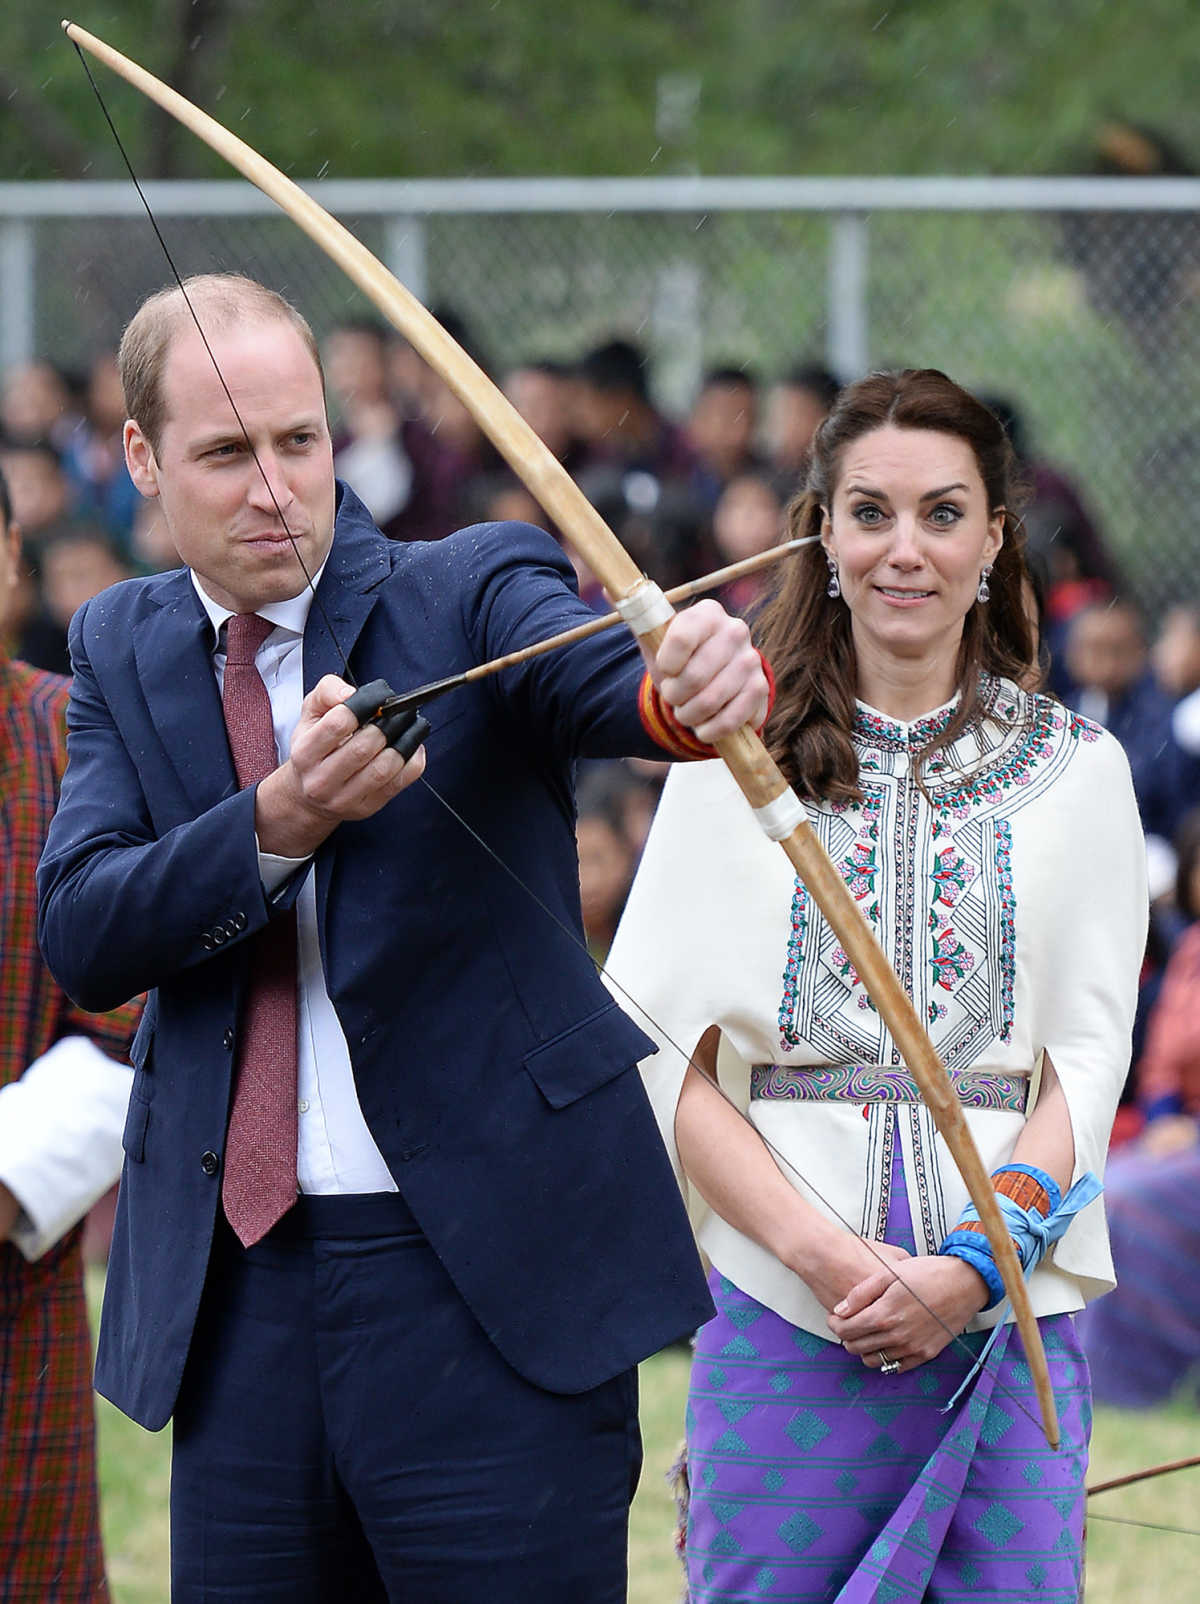 Kate and Will archery.